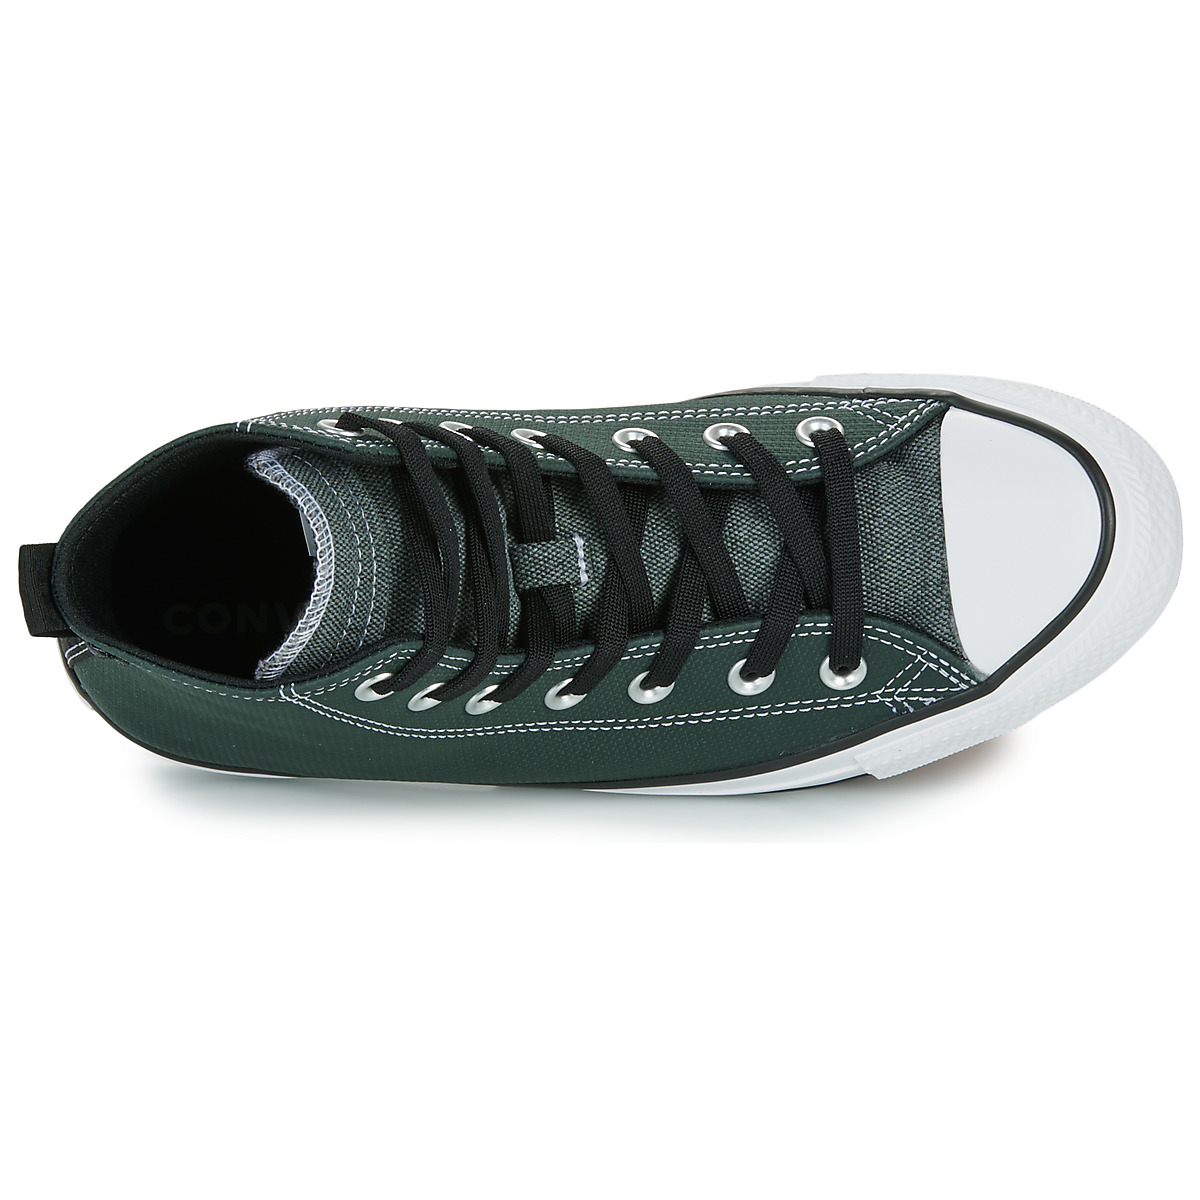 Converse Vert CHUCK TAYLOR ALL STAR COUNTER CLIMATE MdHViW84